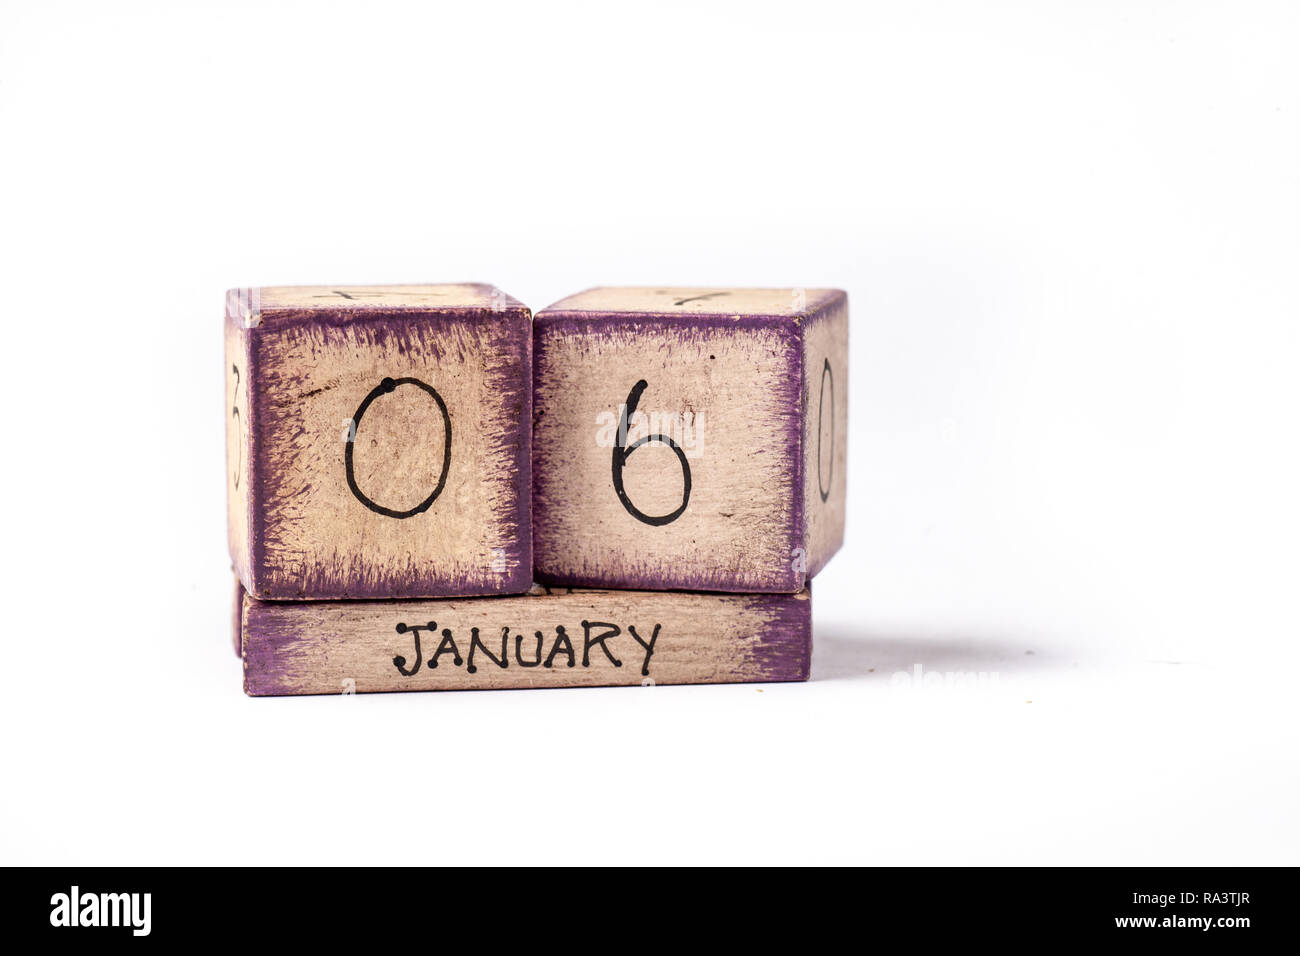 Colorful Wooden Block Perpetual Calendar Showing January 6th Stock Photo